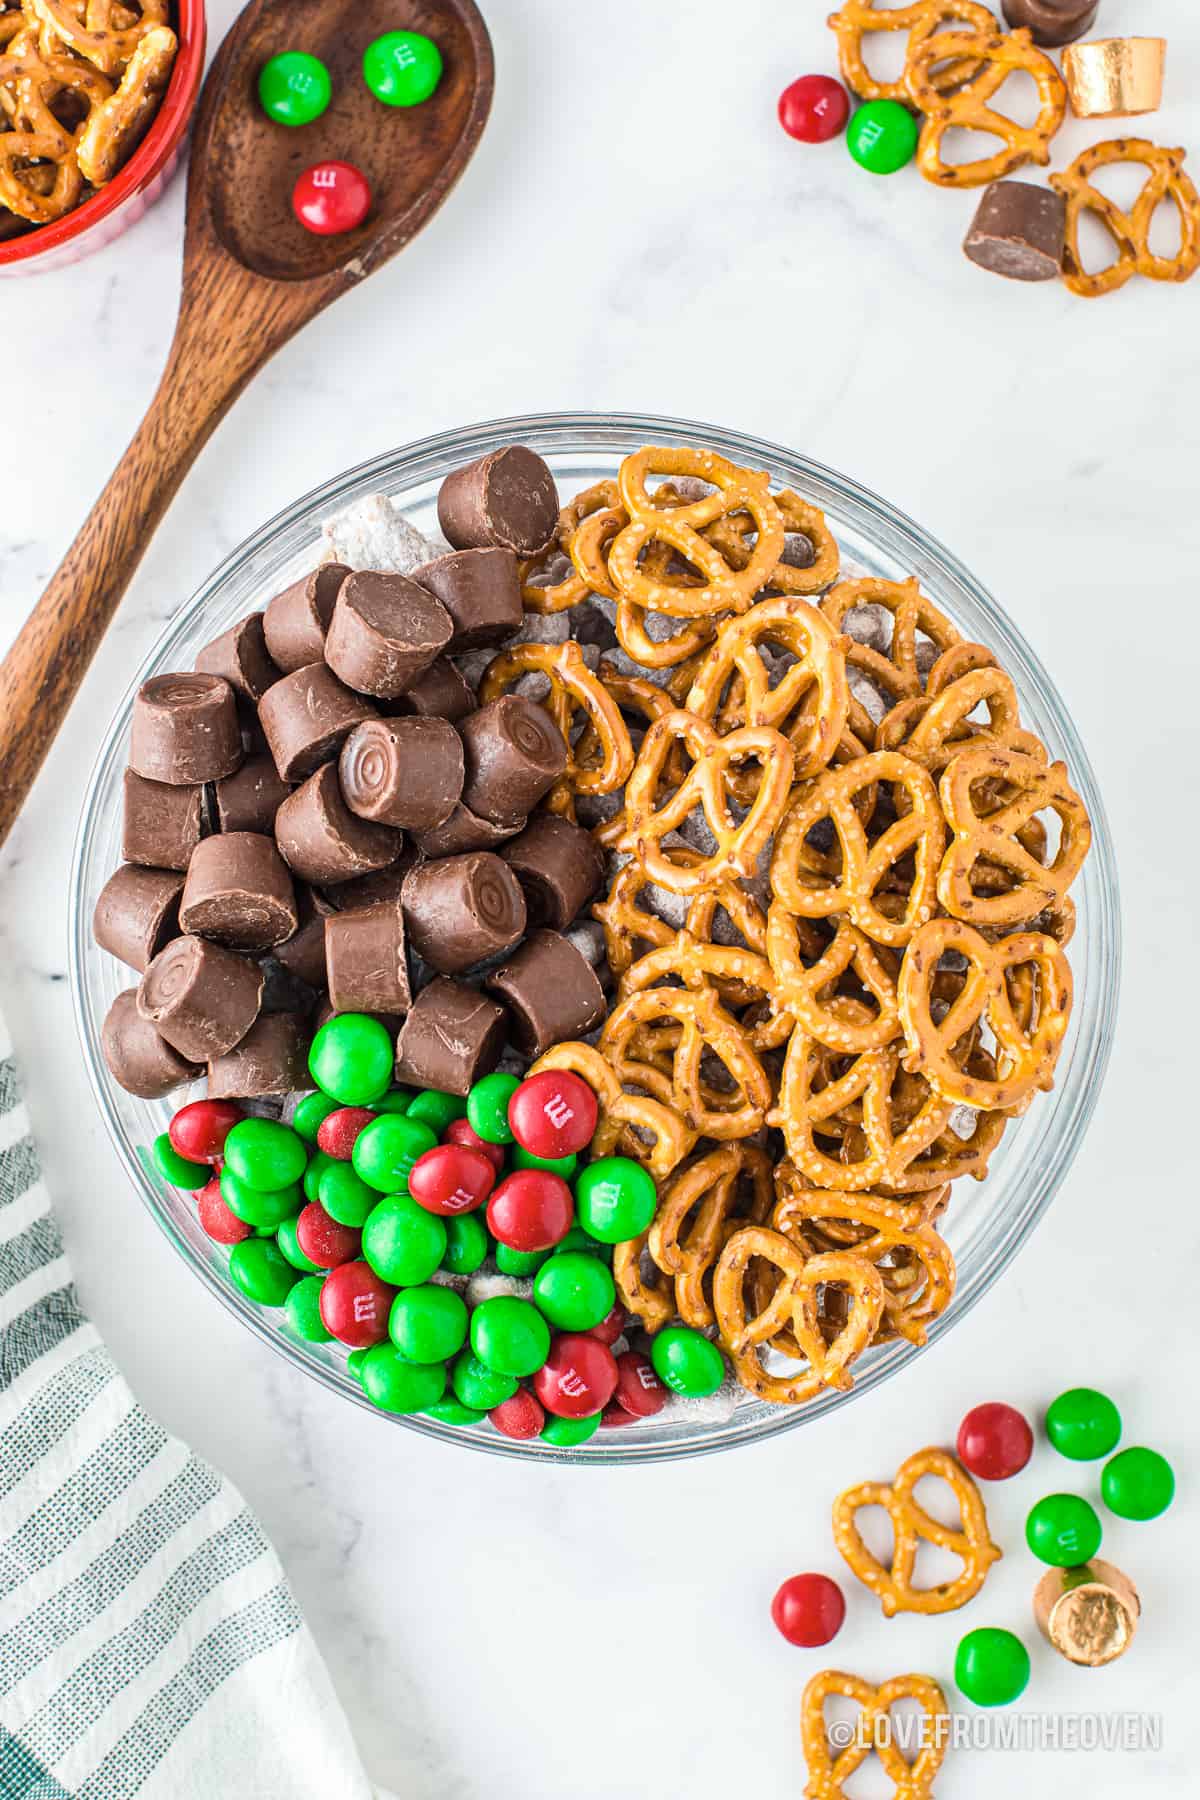 A close up of m&ms rolos and pretzels in a bowl.